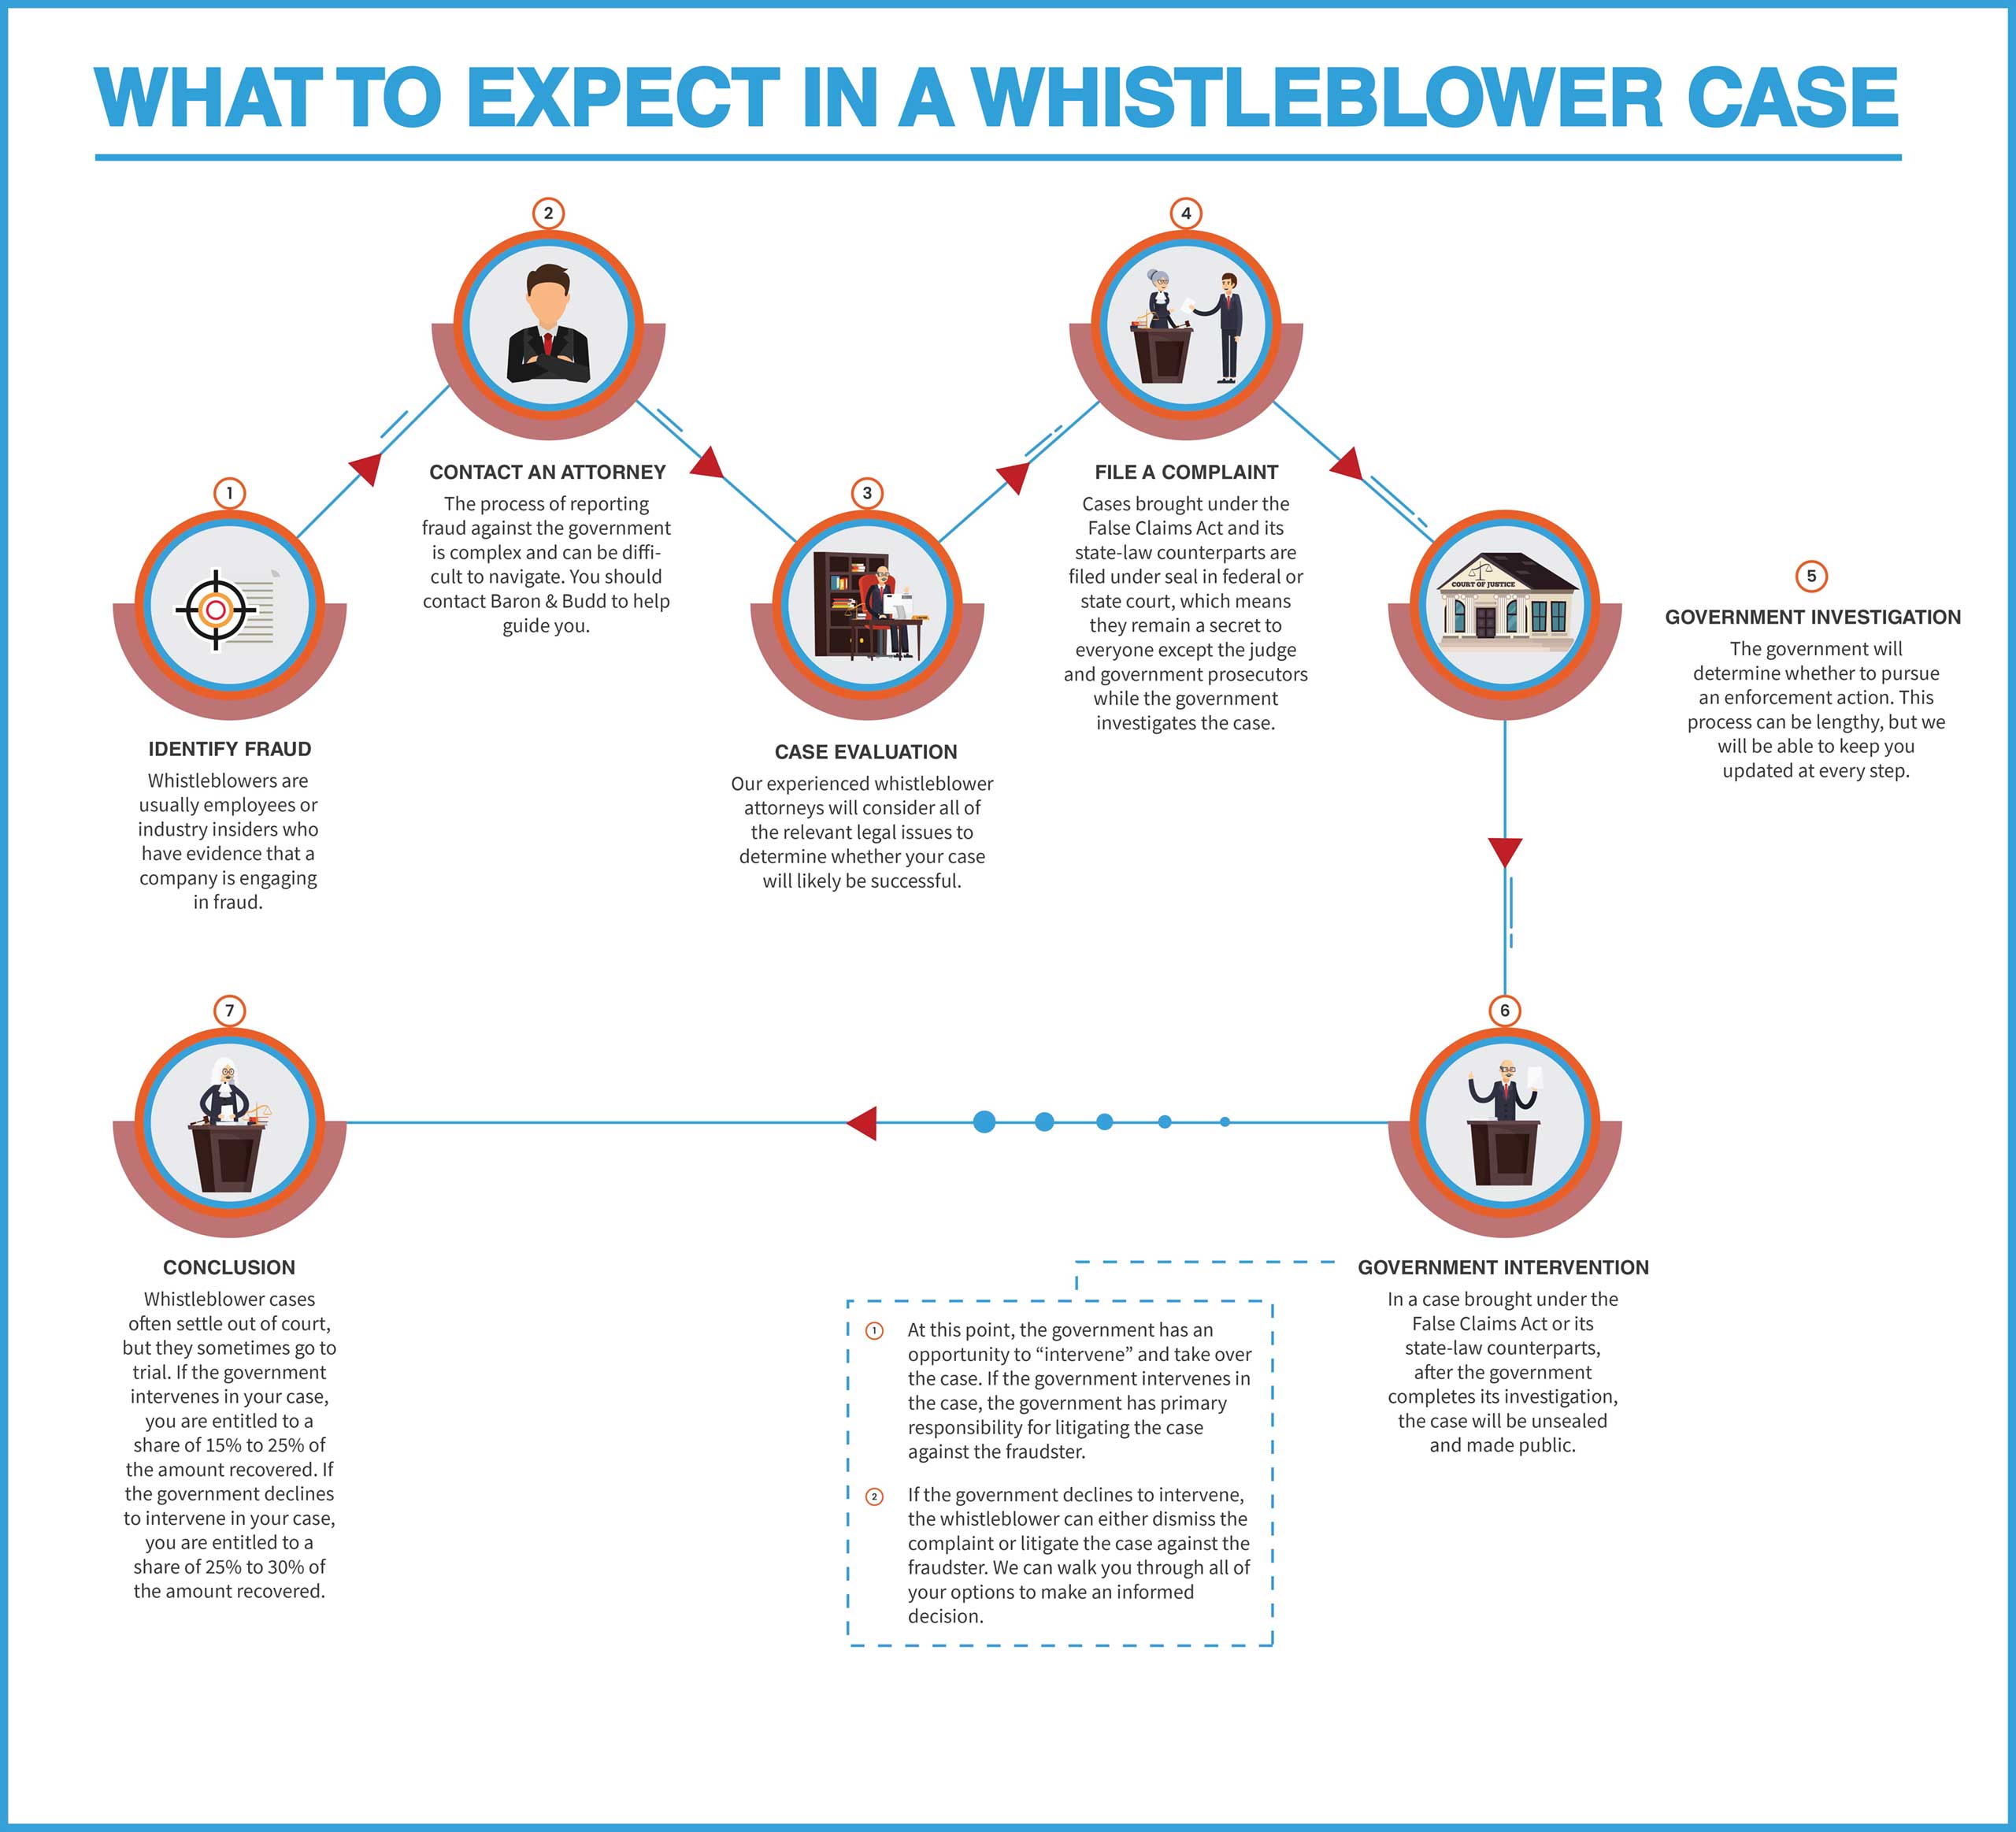 Why You Should Be a Whistleblower - Baron & Budd WhistleBlower Attorneys